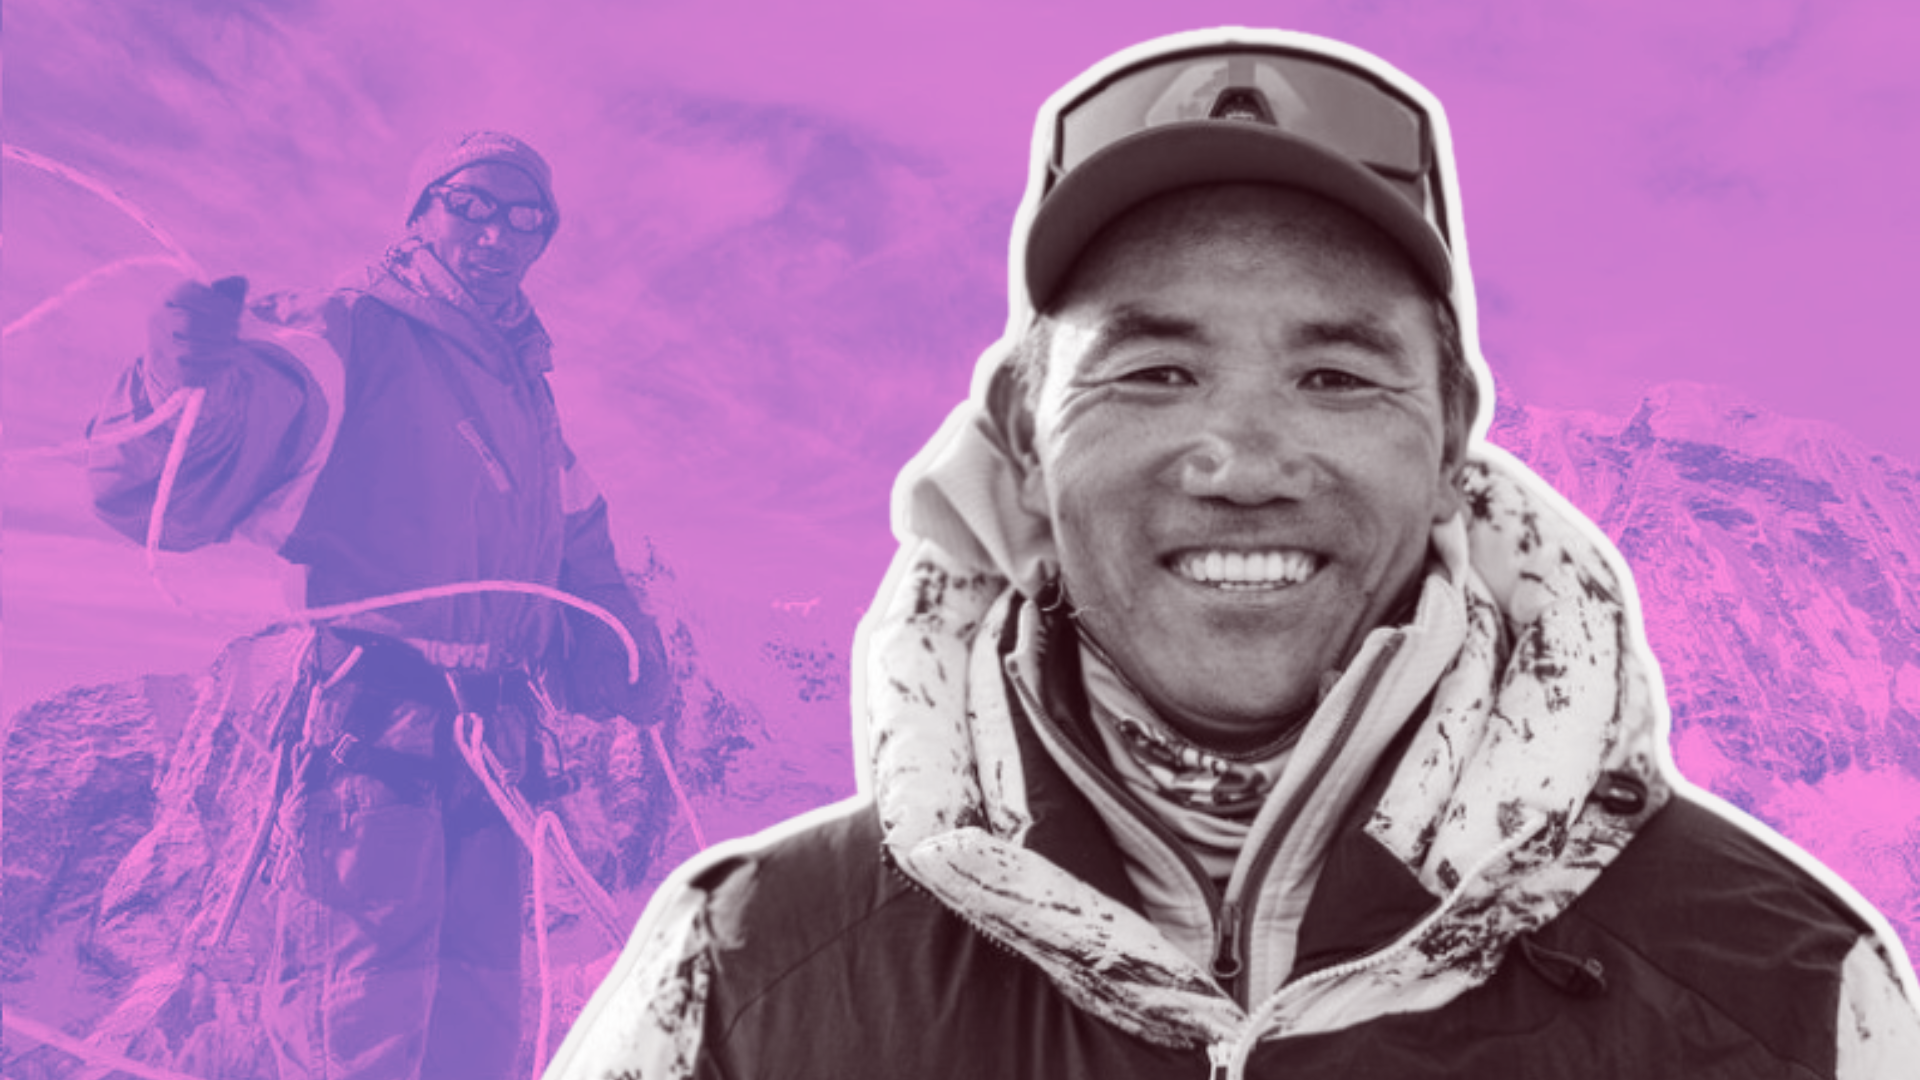 Who Is Kami Rita Sherpa? Nepali Climber Breaks His Own Record By Scaling Mt. Everest For The 29th Time